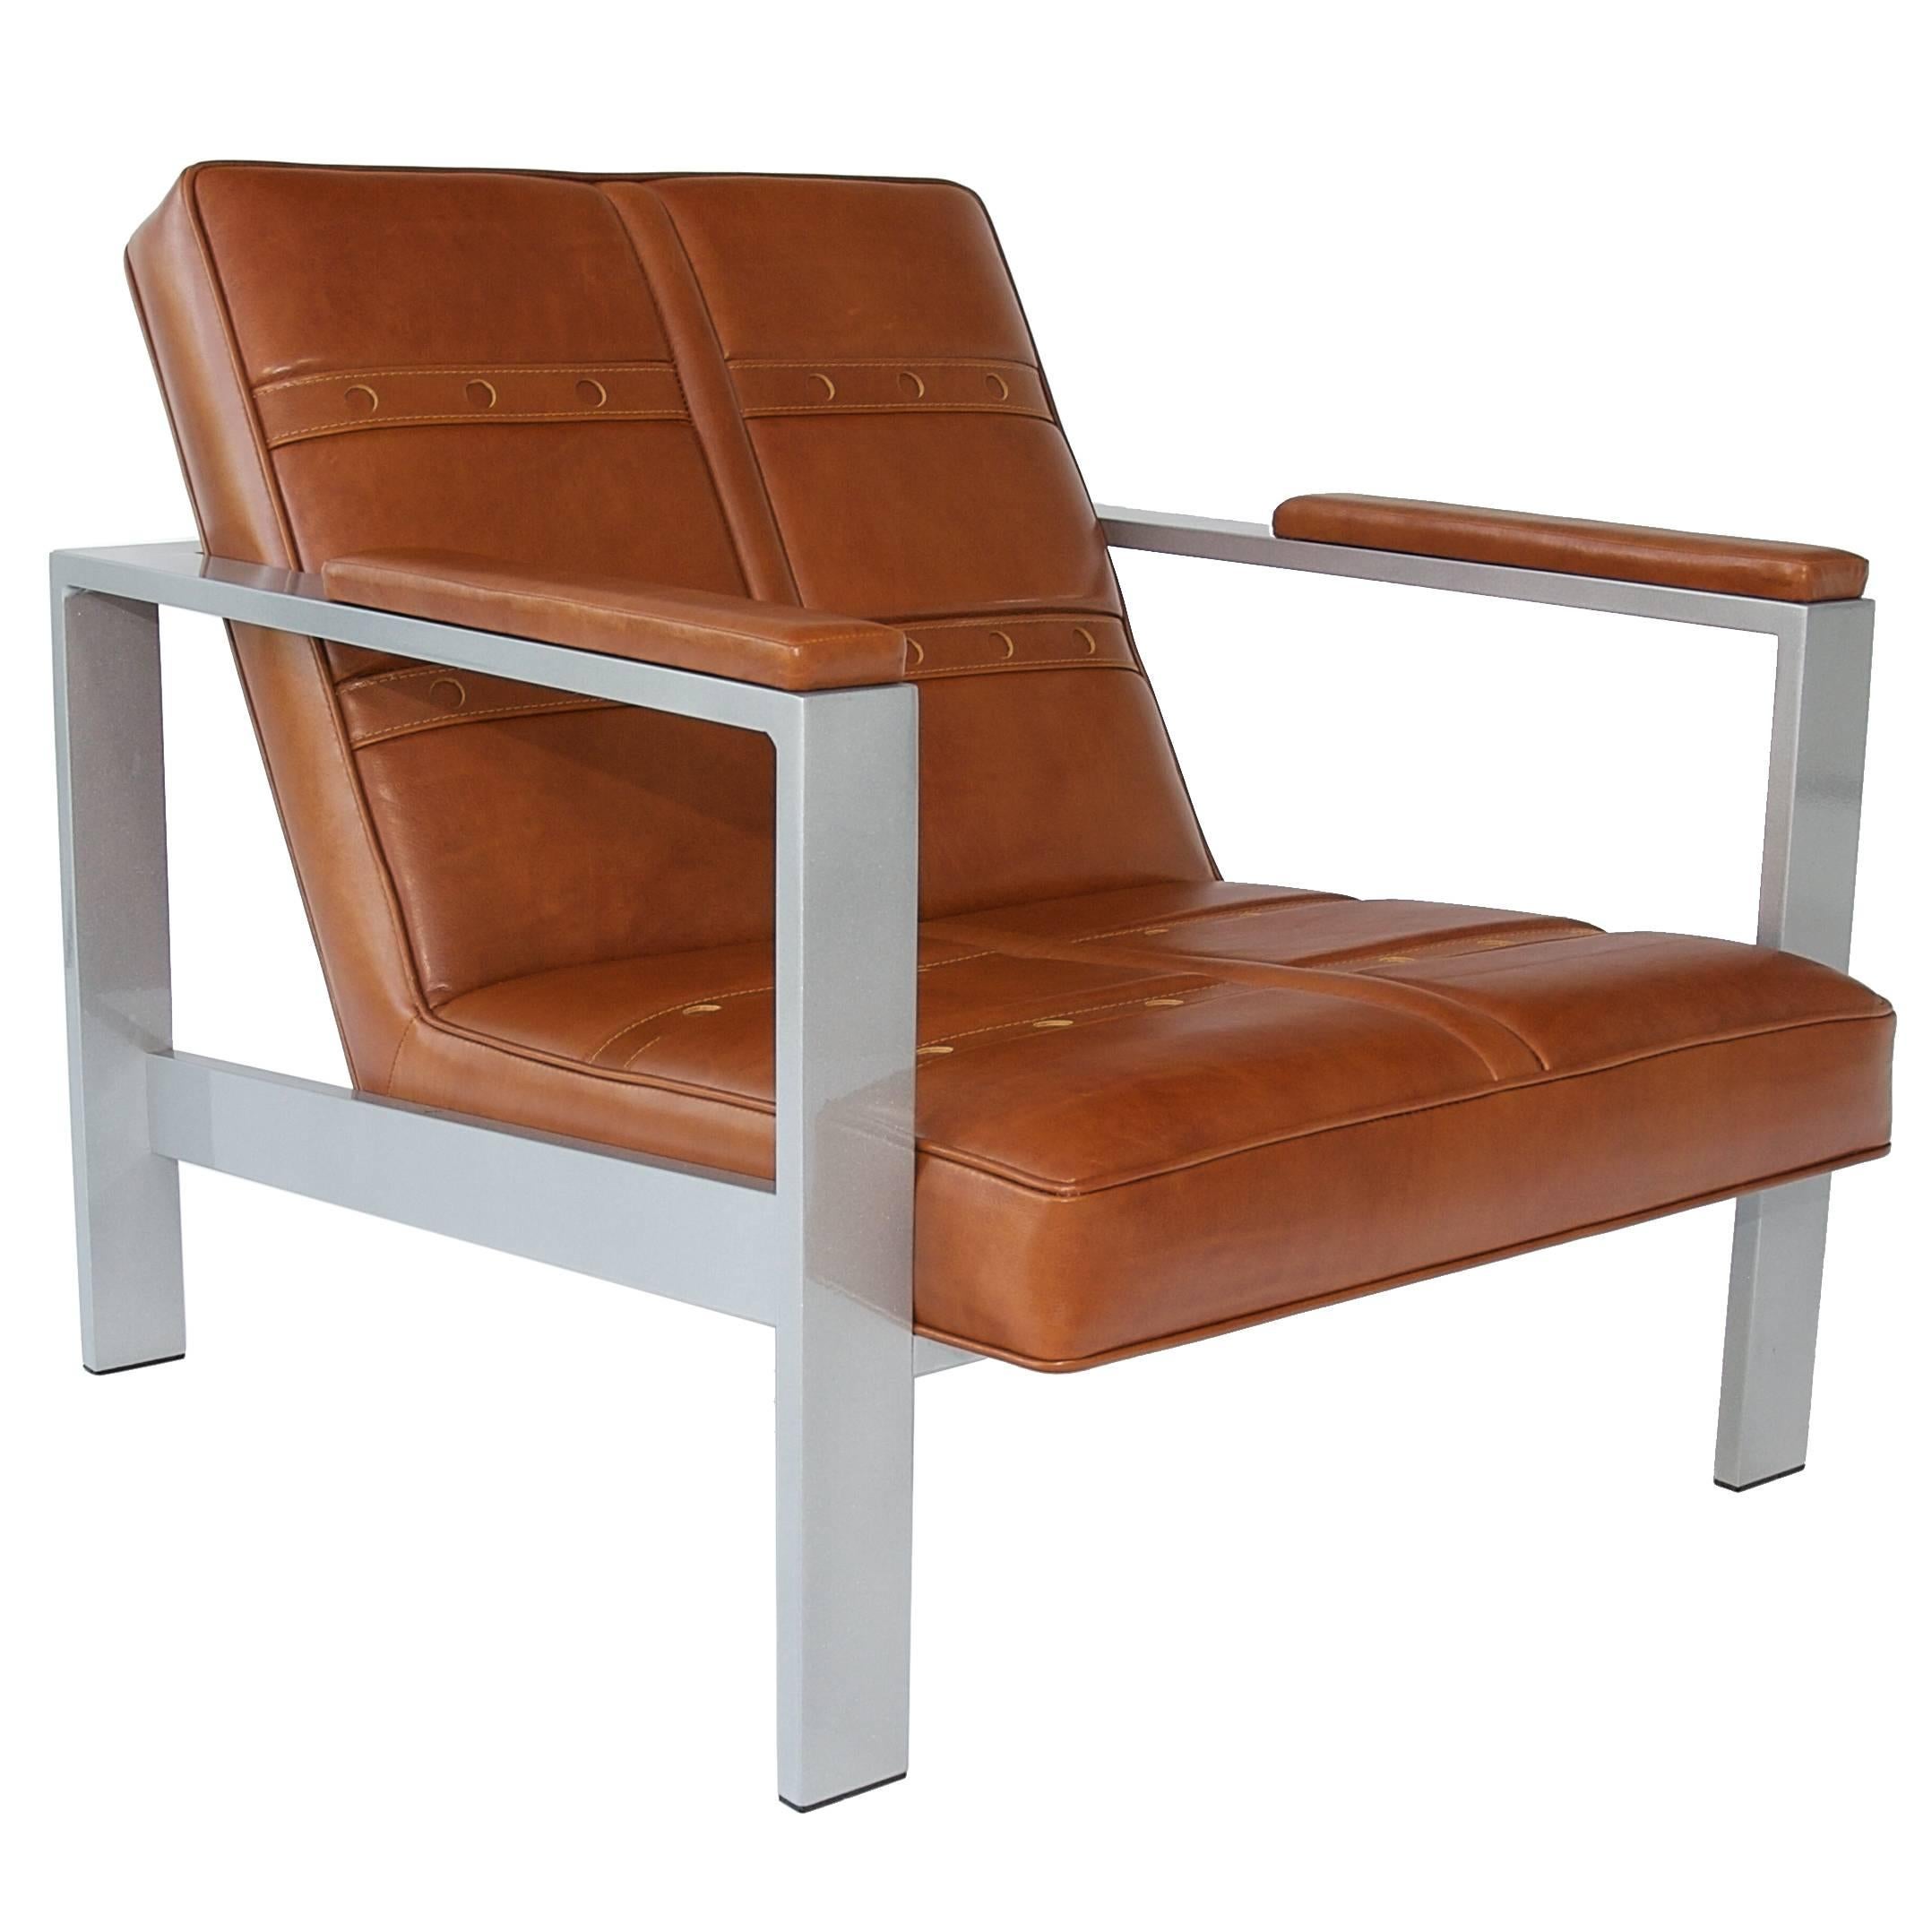 Daytona Lounge Chair "One of a Kind" in Whisky and Aluminum by Philip Caggiano For Sale